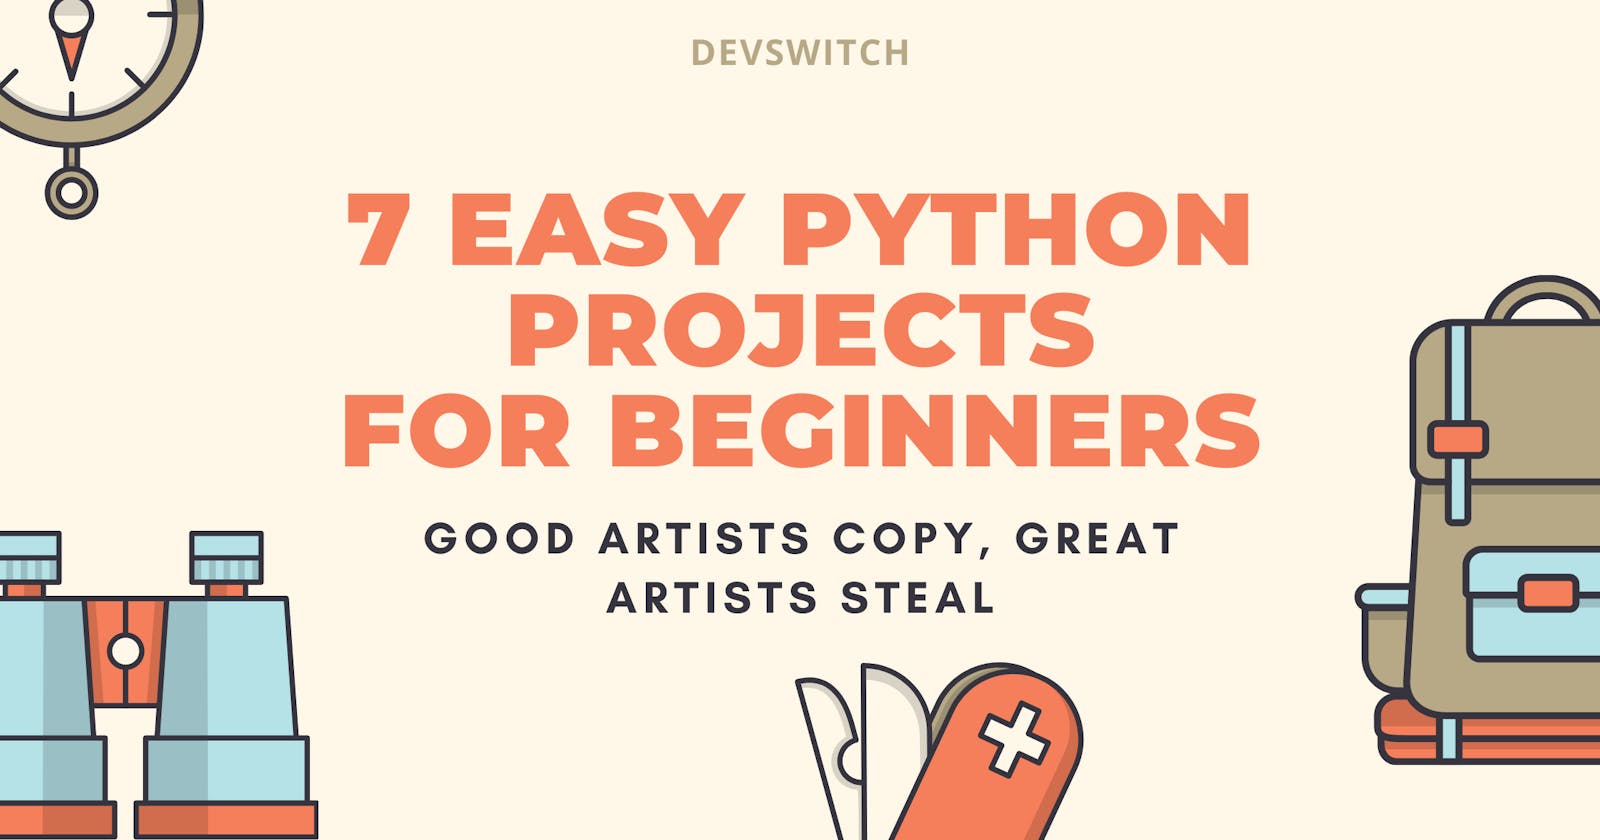 7 Easy Python Projects for Beginners [with code]